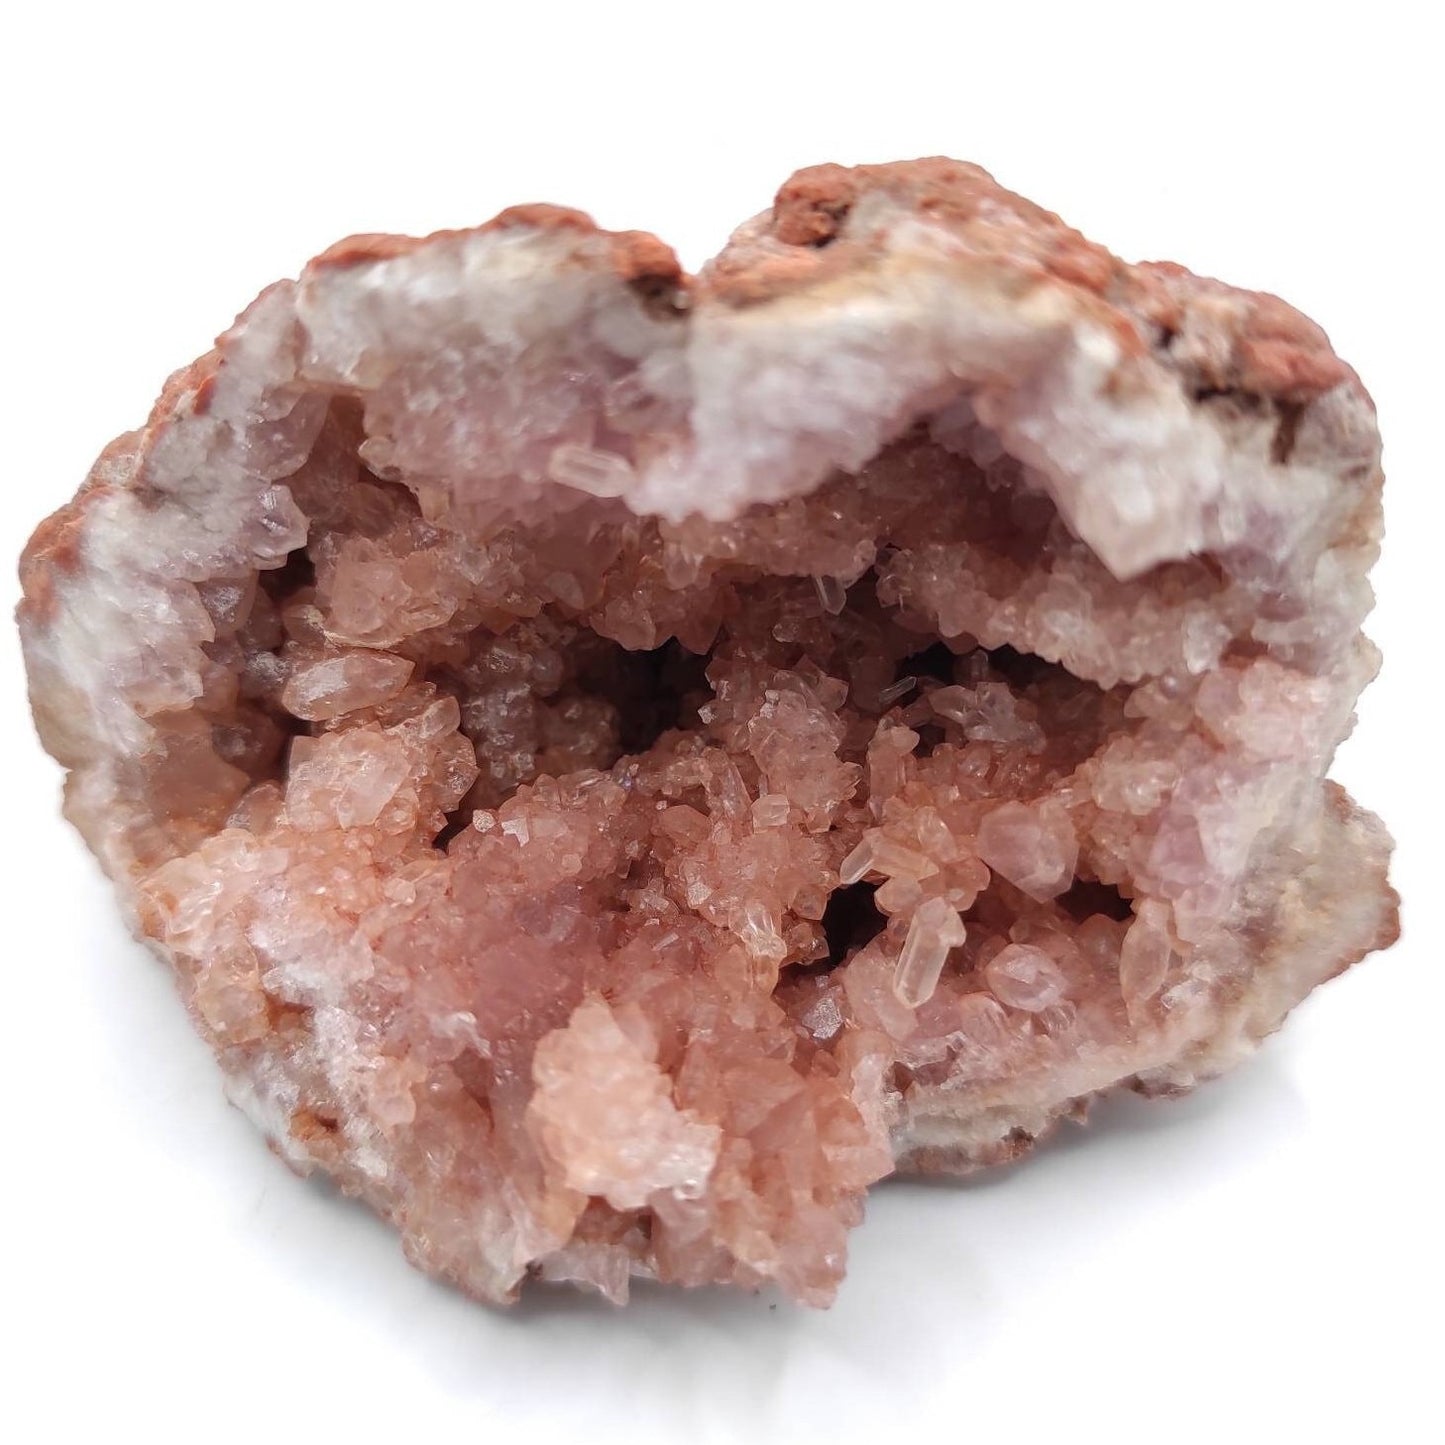 99g Rare Pink Amethyst from Brazil - Raw Pink Amethyst - Healing Crystal Cluster - Natural Pink Amethyst - Unique Crystal - Amethyst Geode